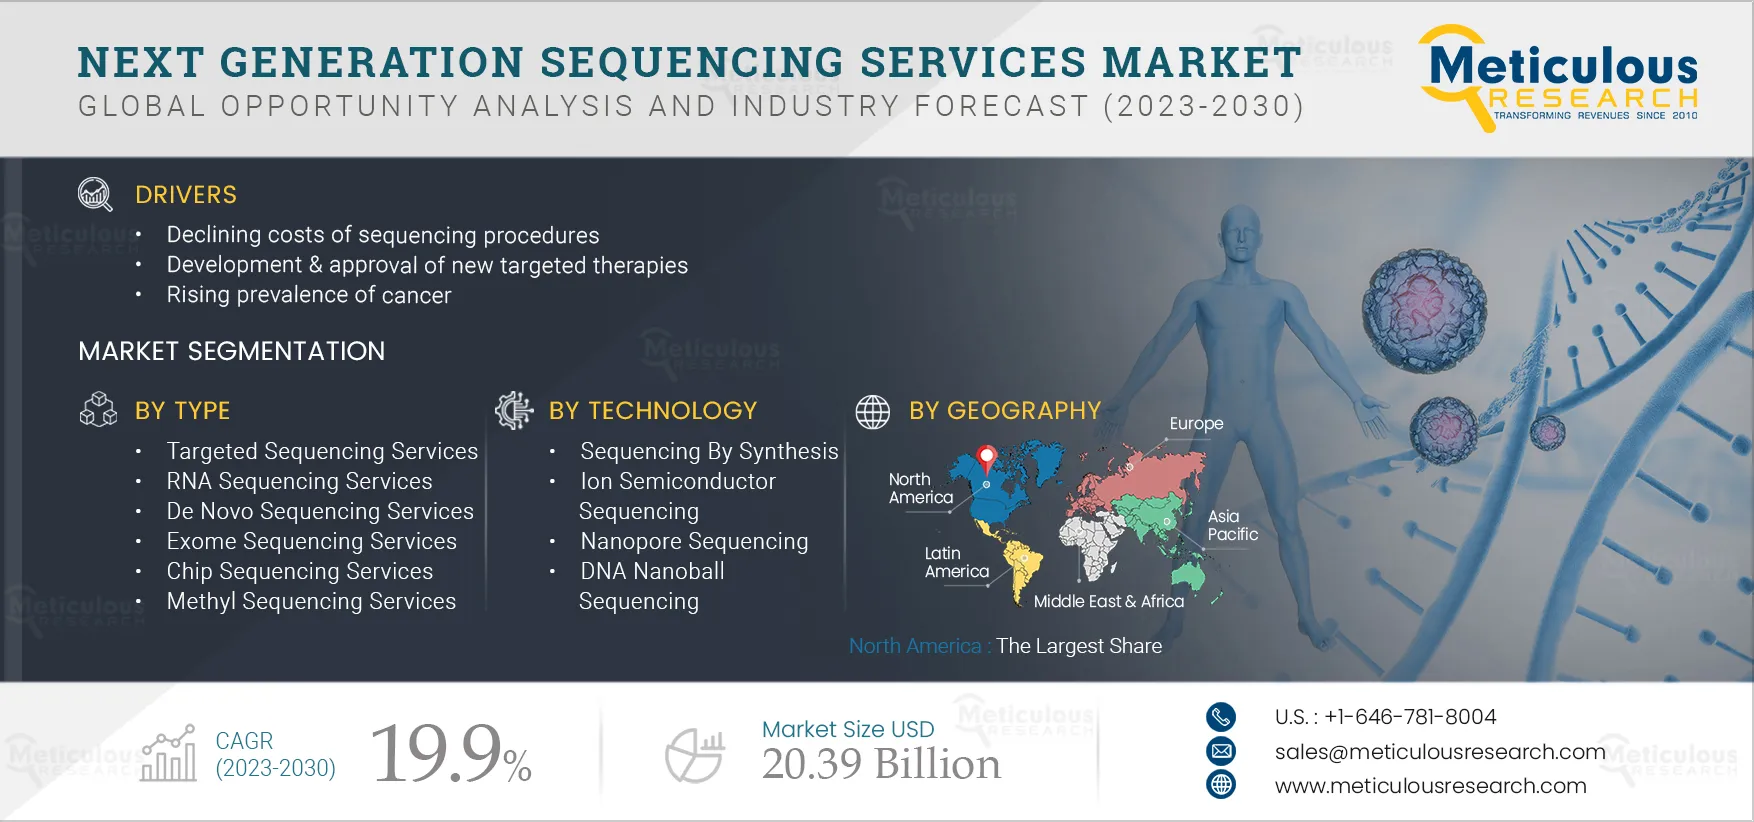 Next Generation Sequencing Services Market 